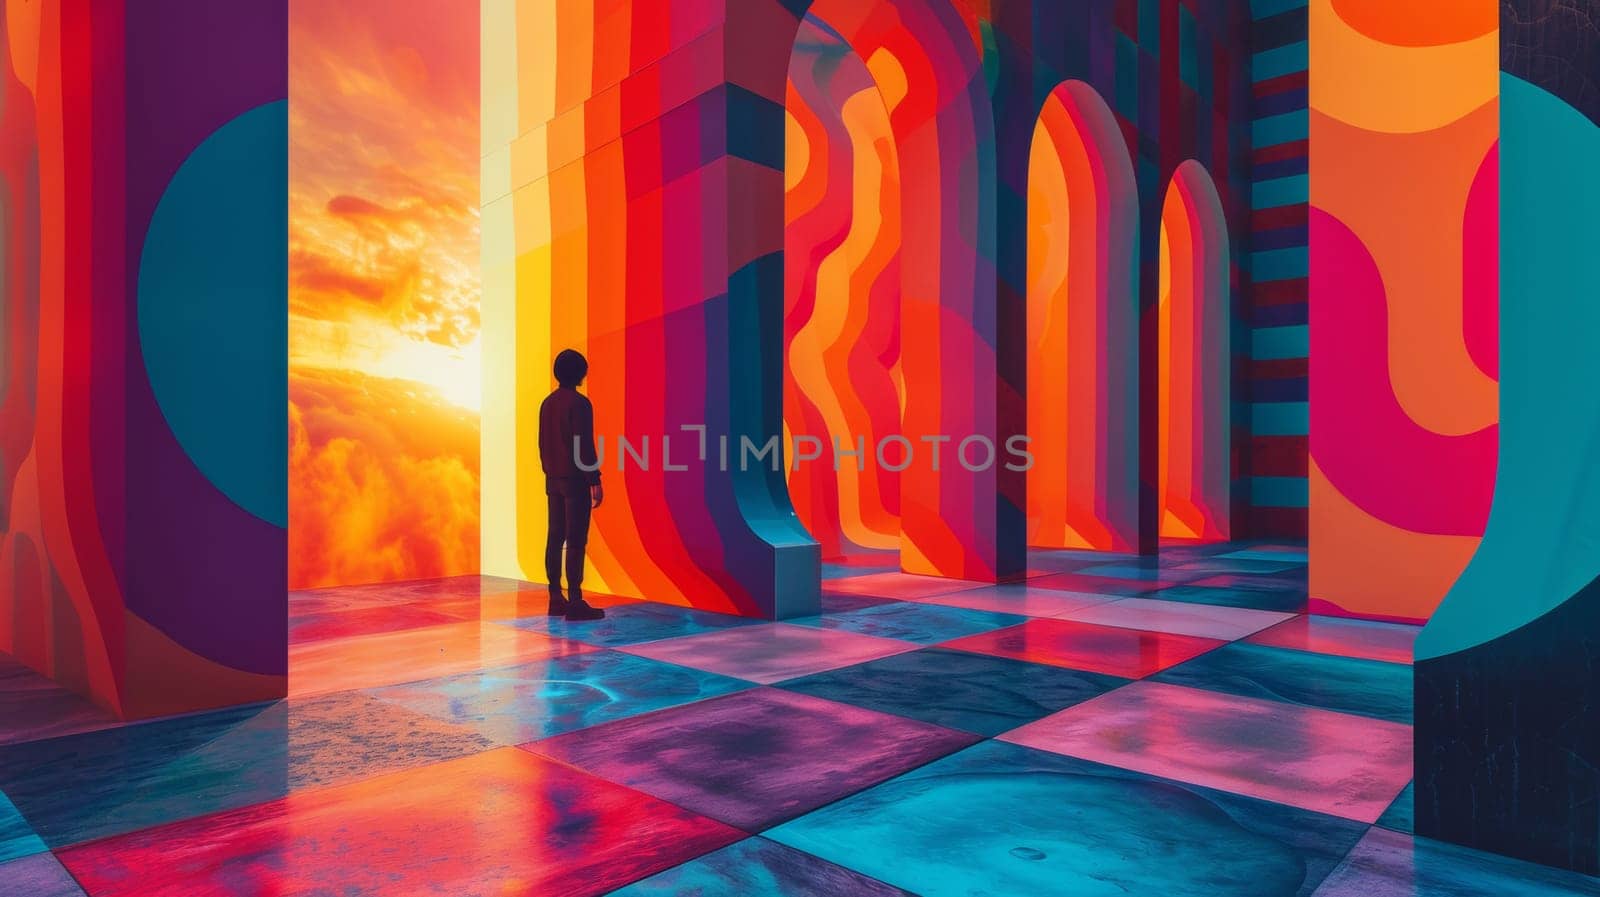 A person standing in a colorful room with an abstract background